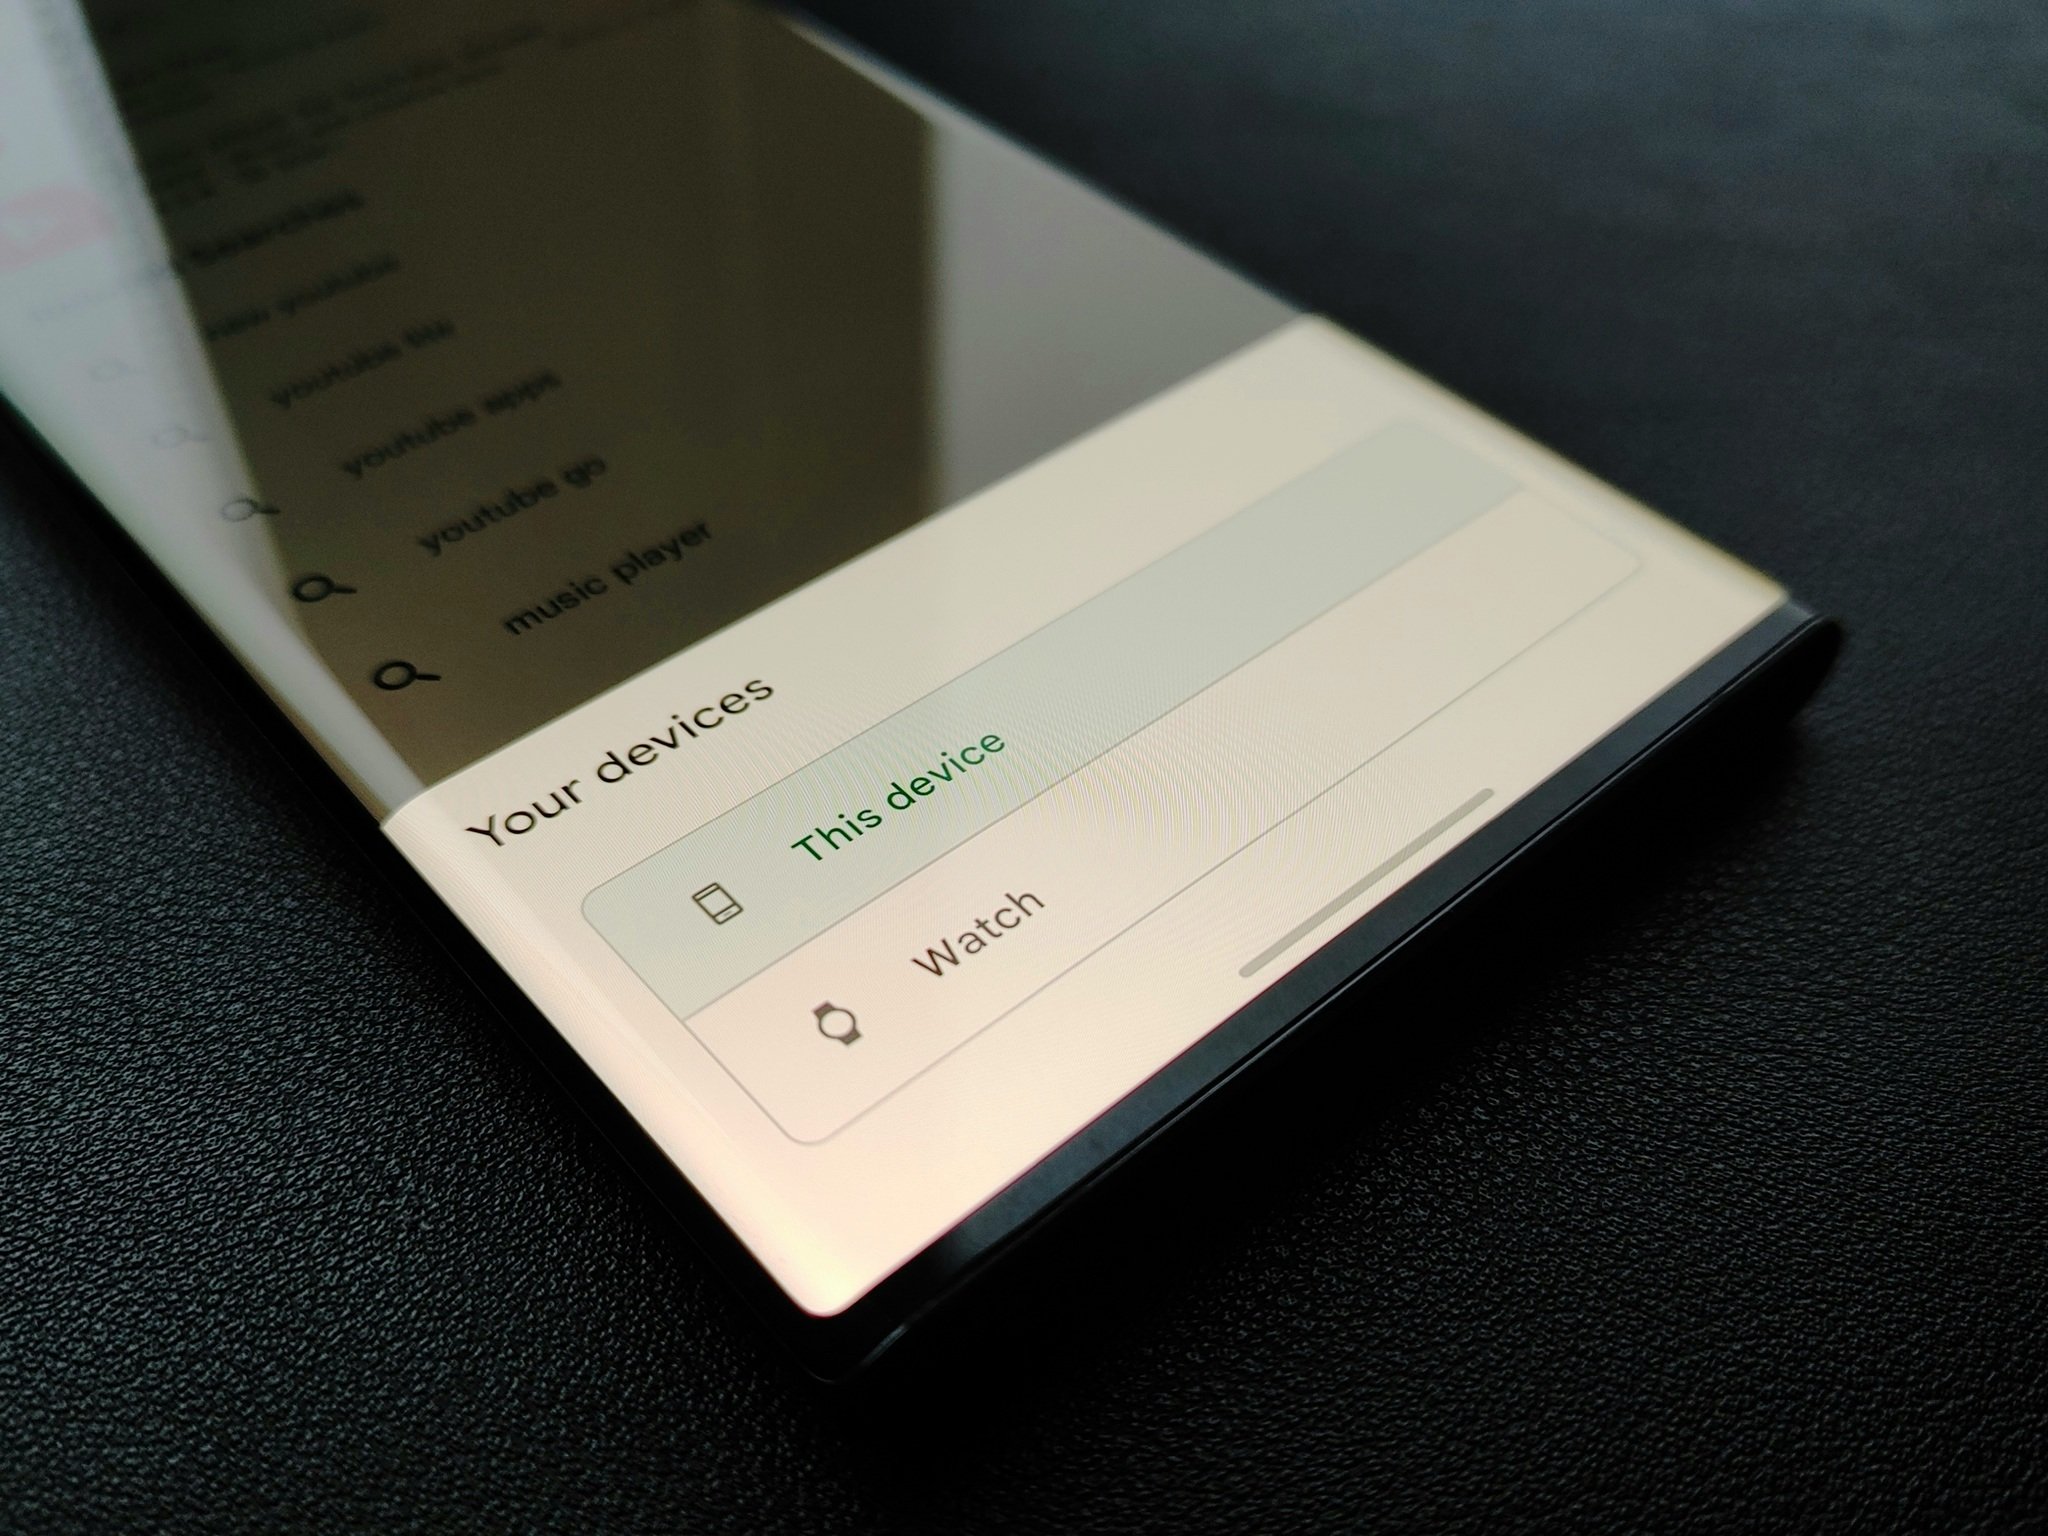 Google Play Store Device Search Filter